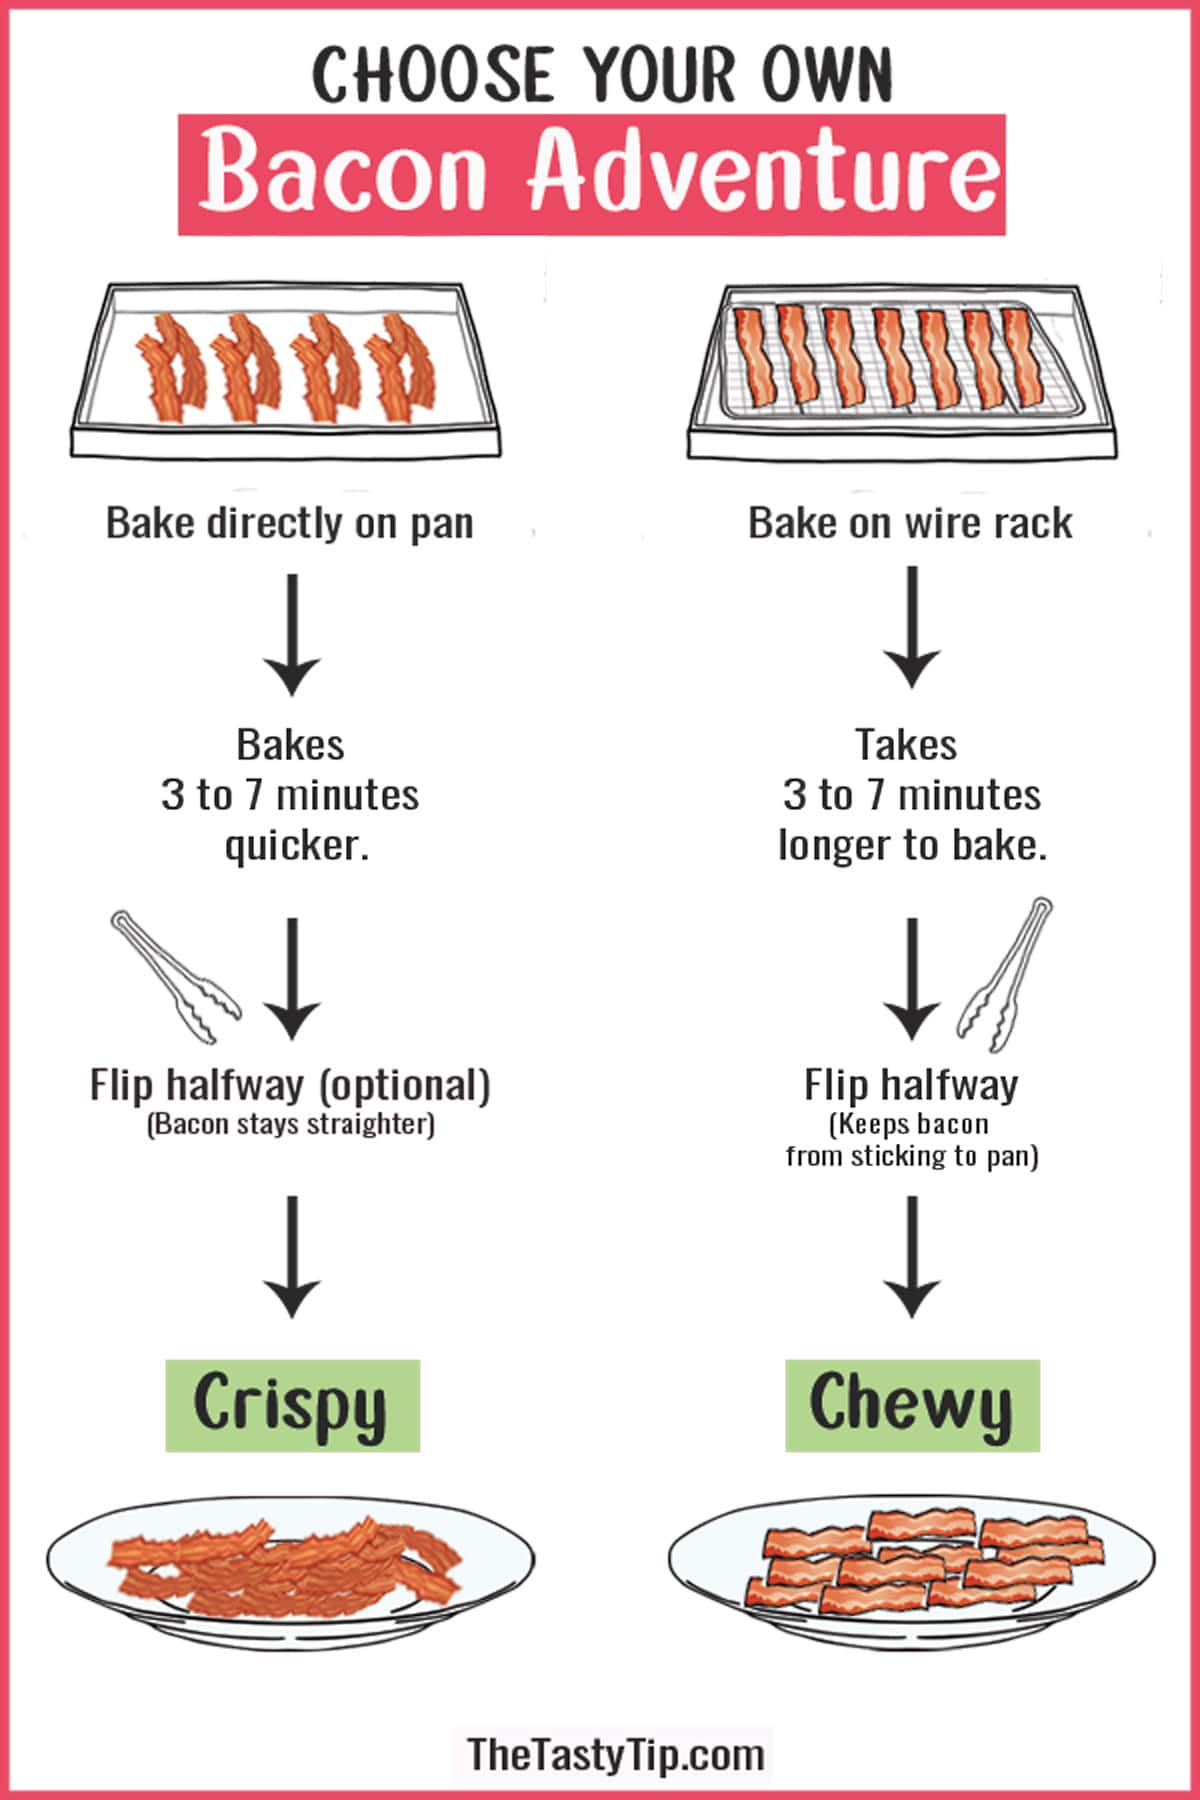 Infographic showing how to cook bacon in the oven to get either crispy or chewy bacon.